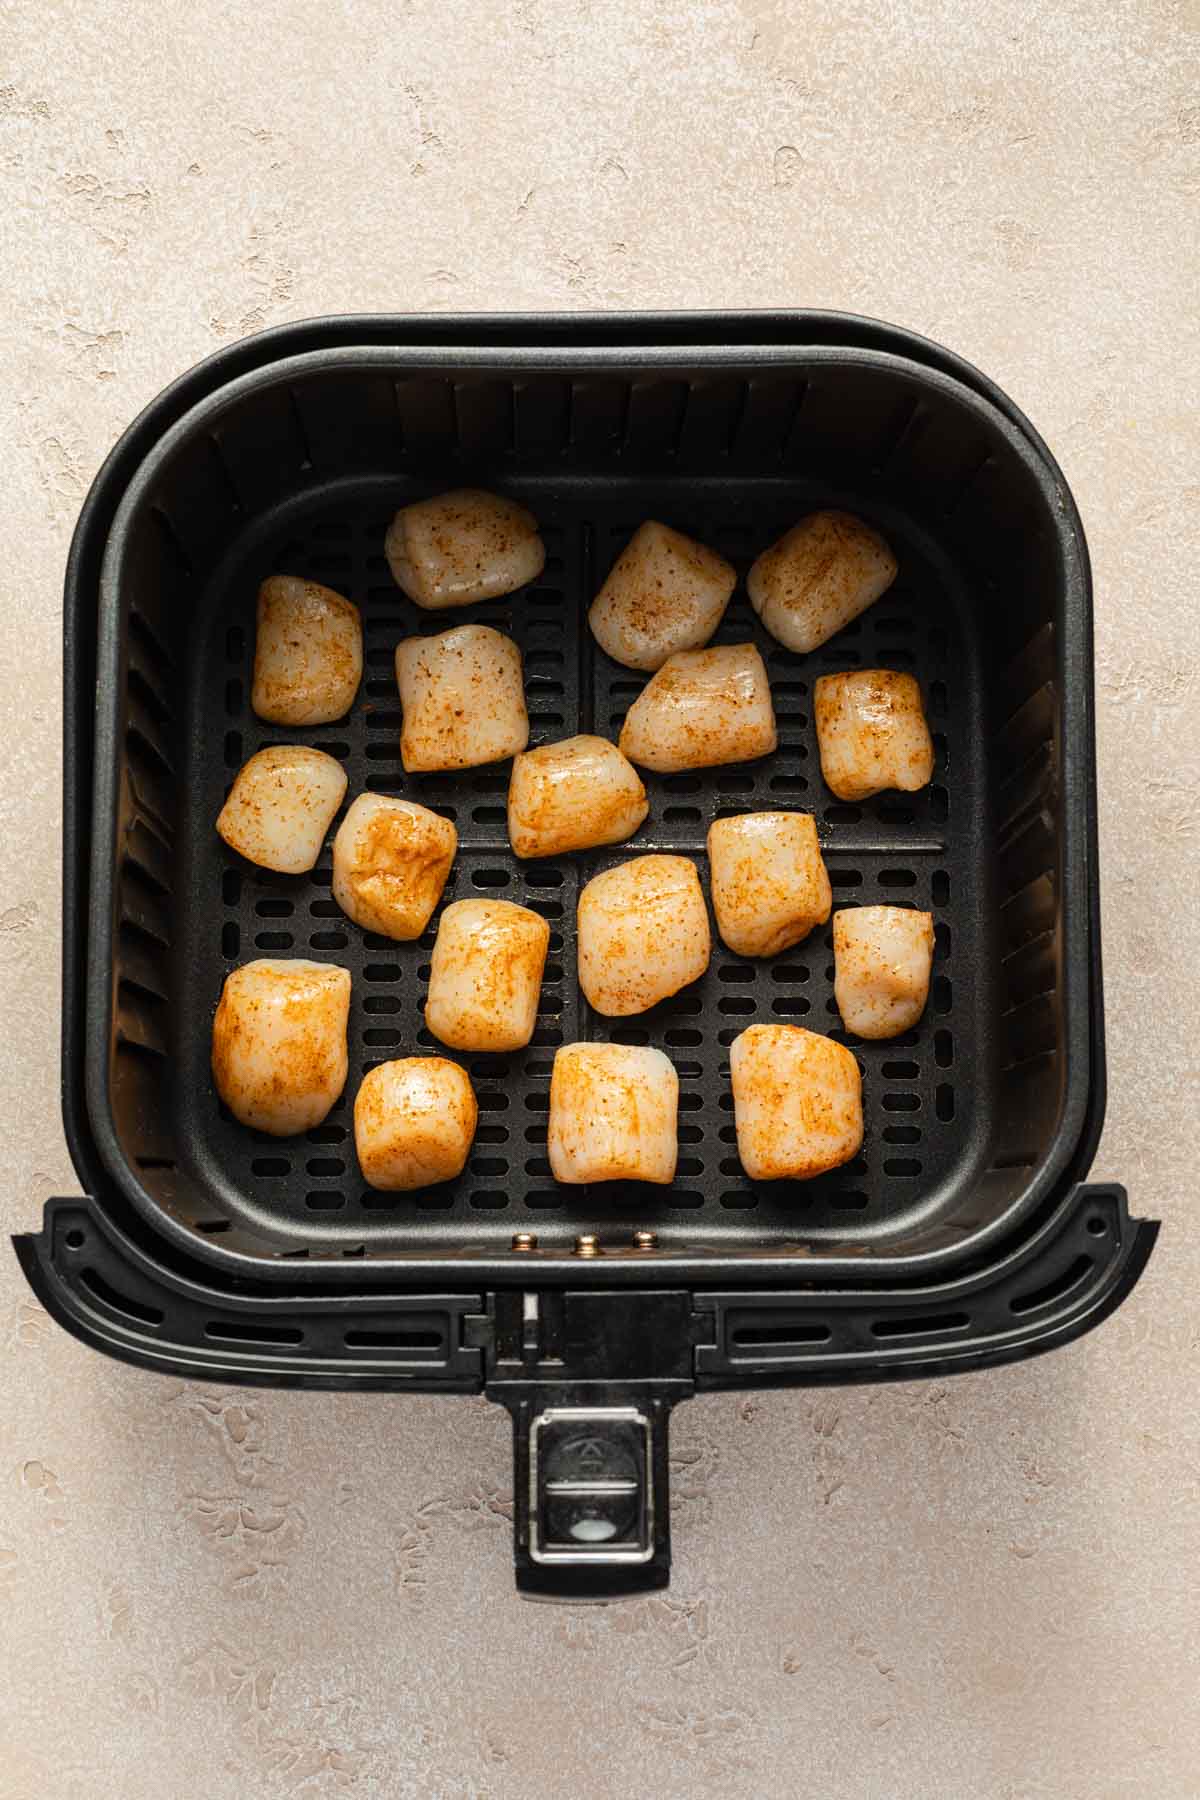 Scallops arranged in a single layer in an air fryer basket.